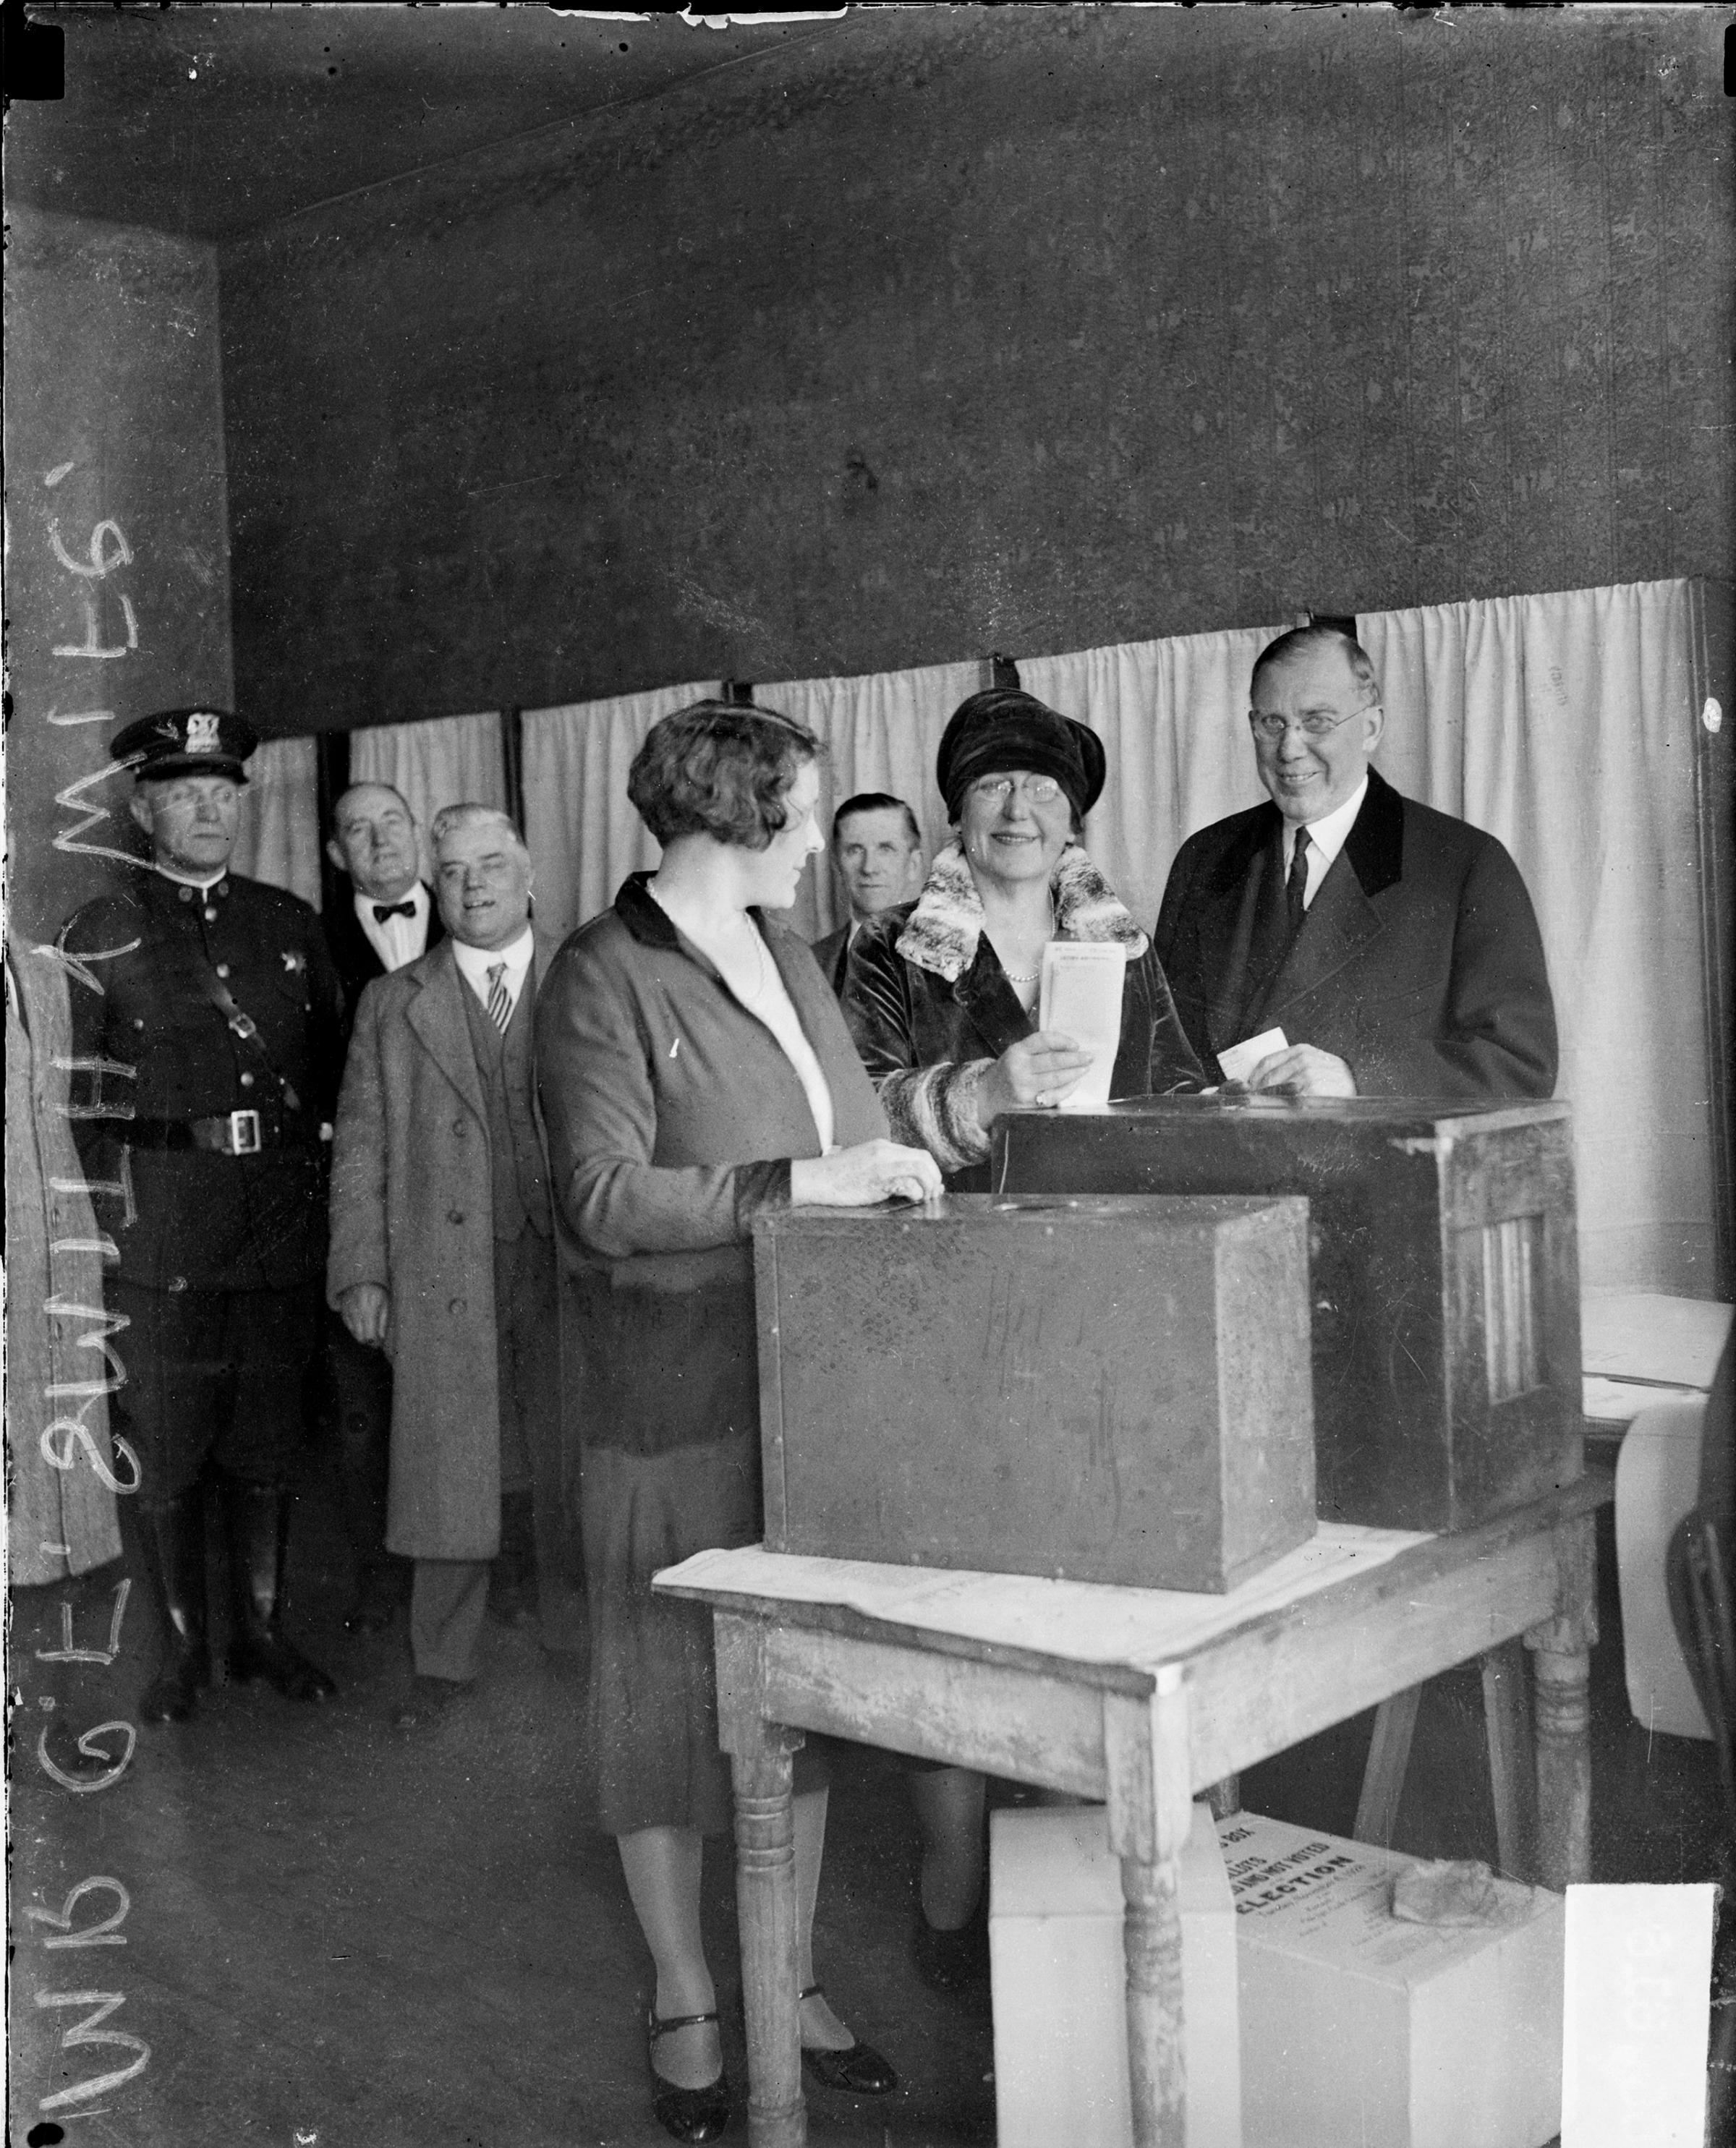 Clayton F. Smith, Deputy Commissioner of City Works, and his wife, Mayme Paschen, looking toward the camera, standing next to a ballot box at a voting poll center in Chicago, in 1928.